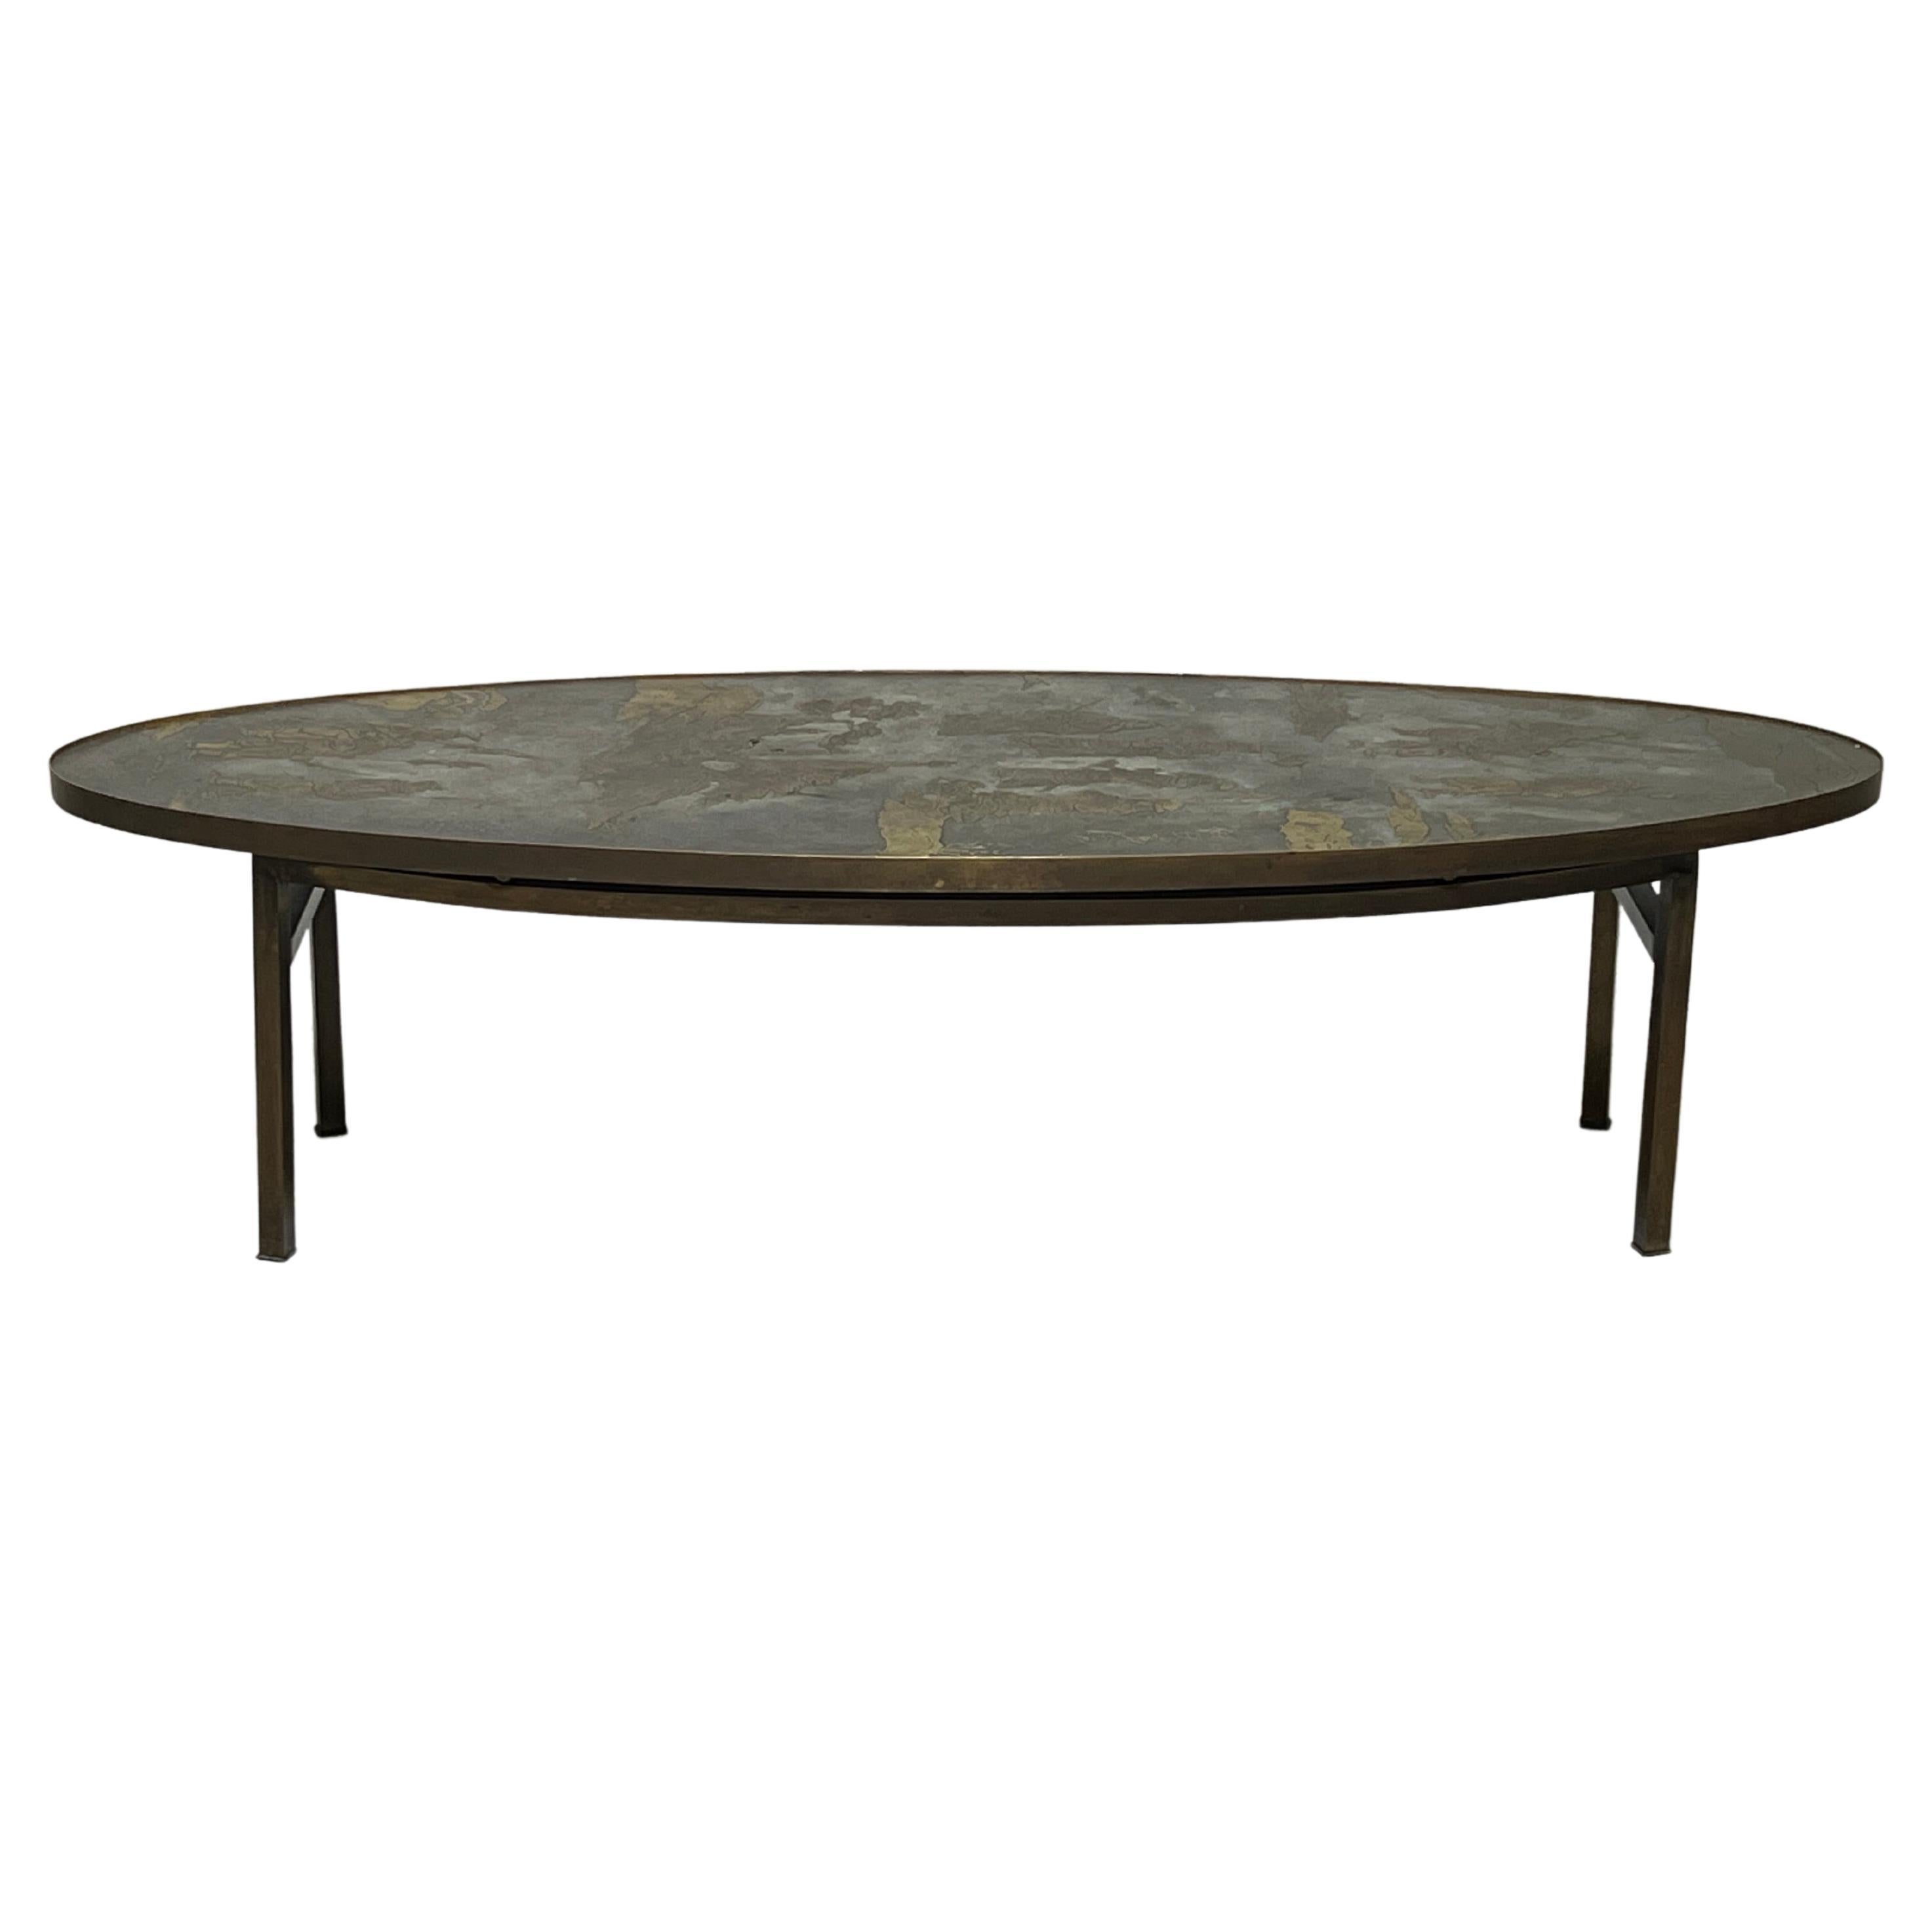 An oval etched bronze coffee table designed by Phillip and Kelvin Laverne.